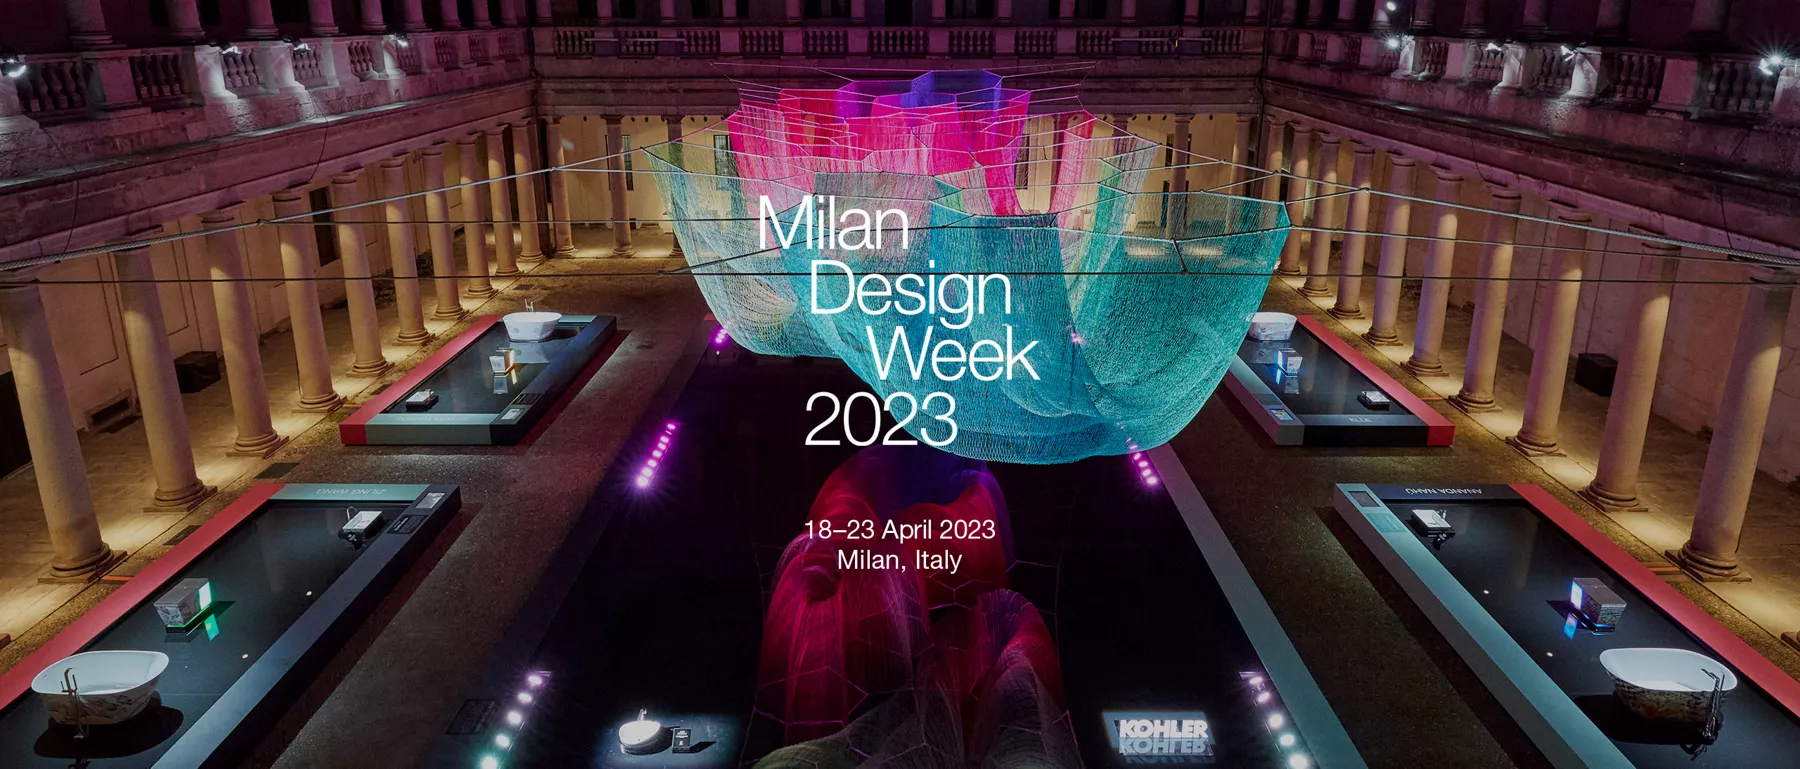 Salone del Mobile 2023 and Milan Design Week highlights